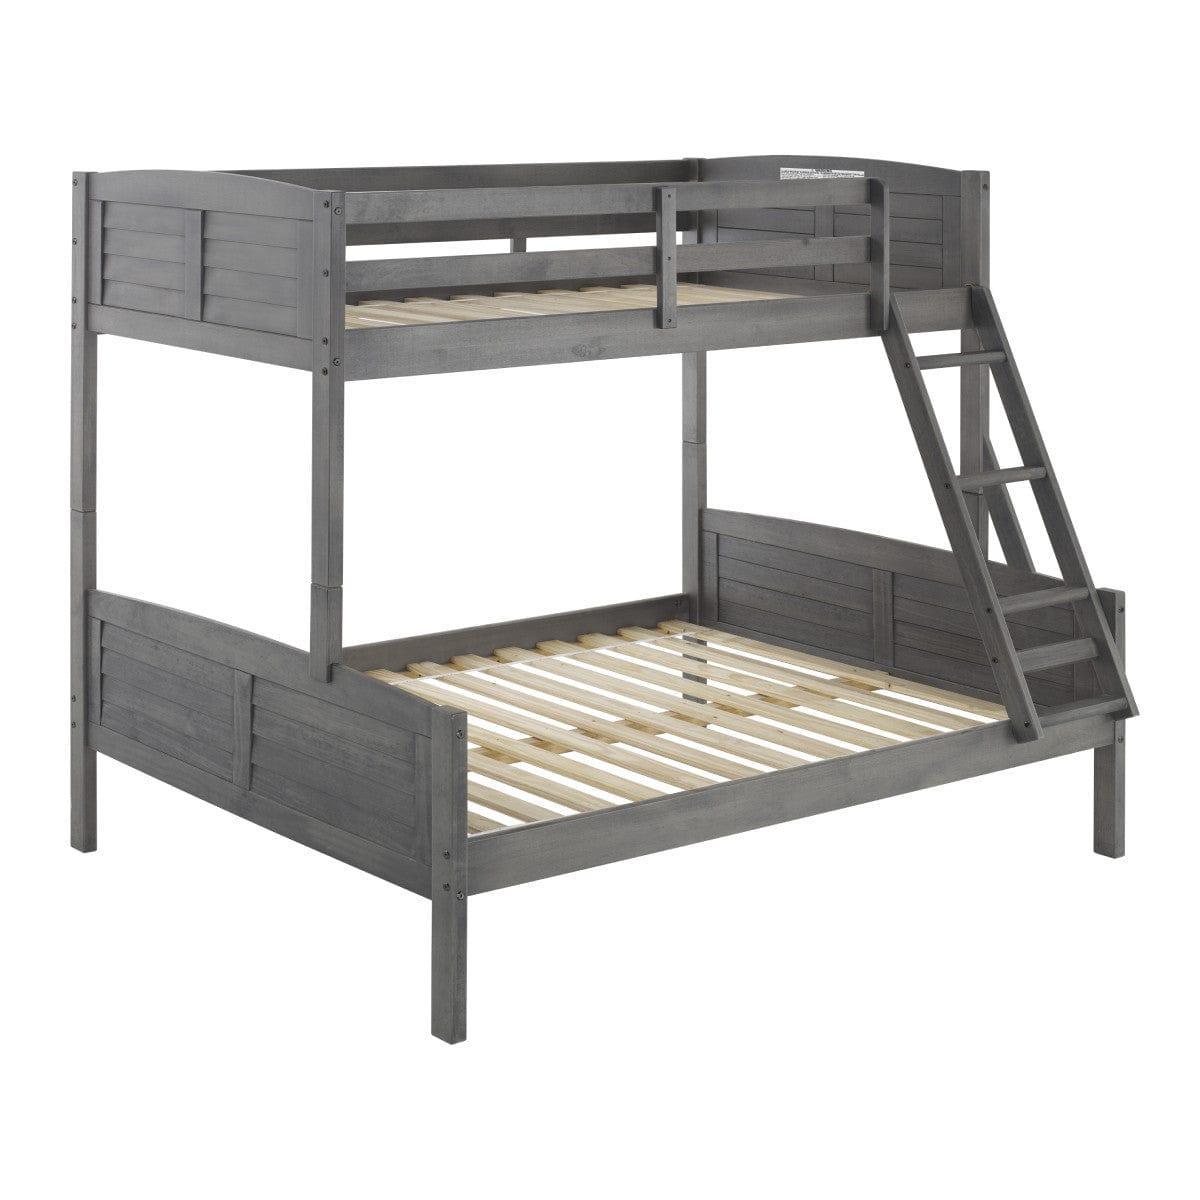 Donco Twin/Full Louver Bunkbed Antique Grey 2012-TFAG - Bedroom Depot USA